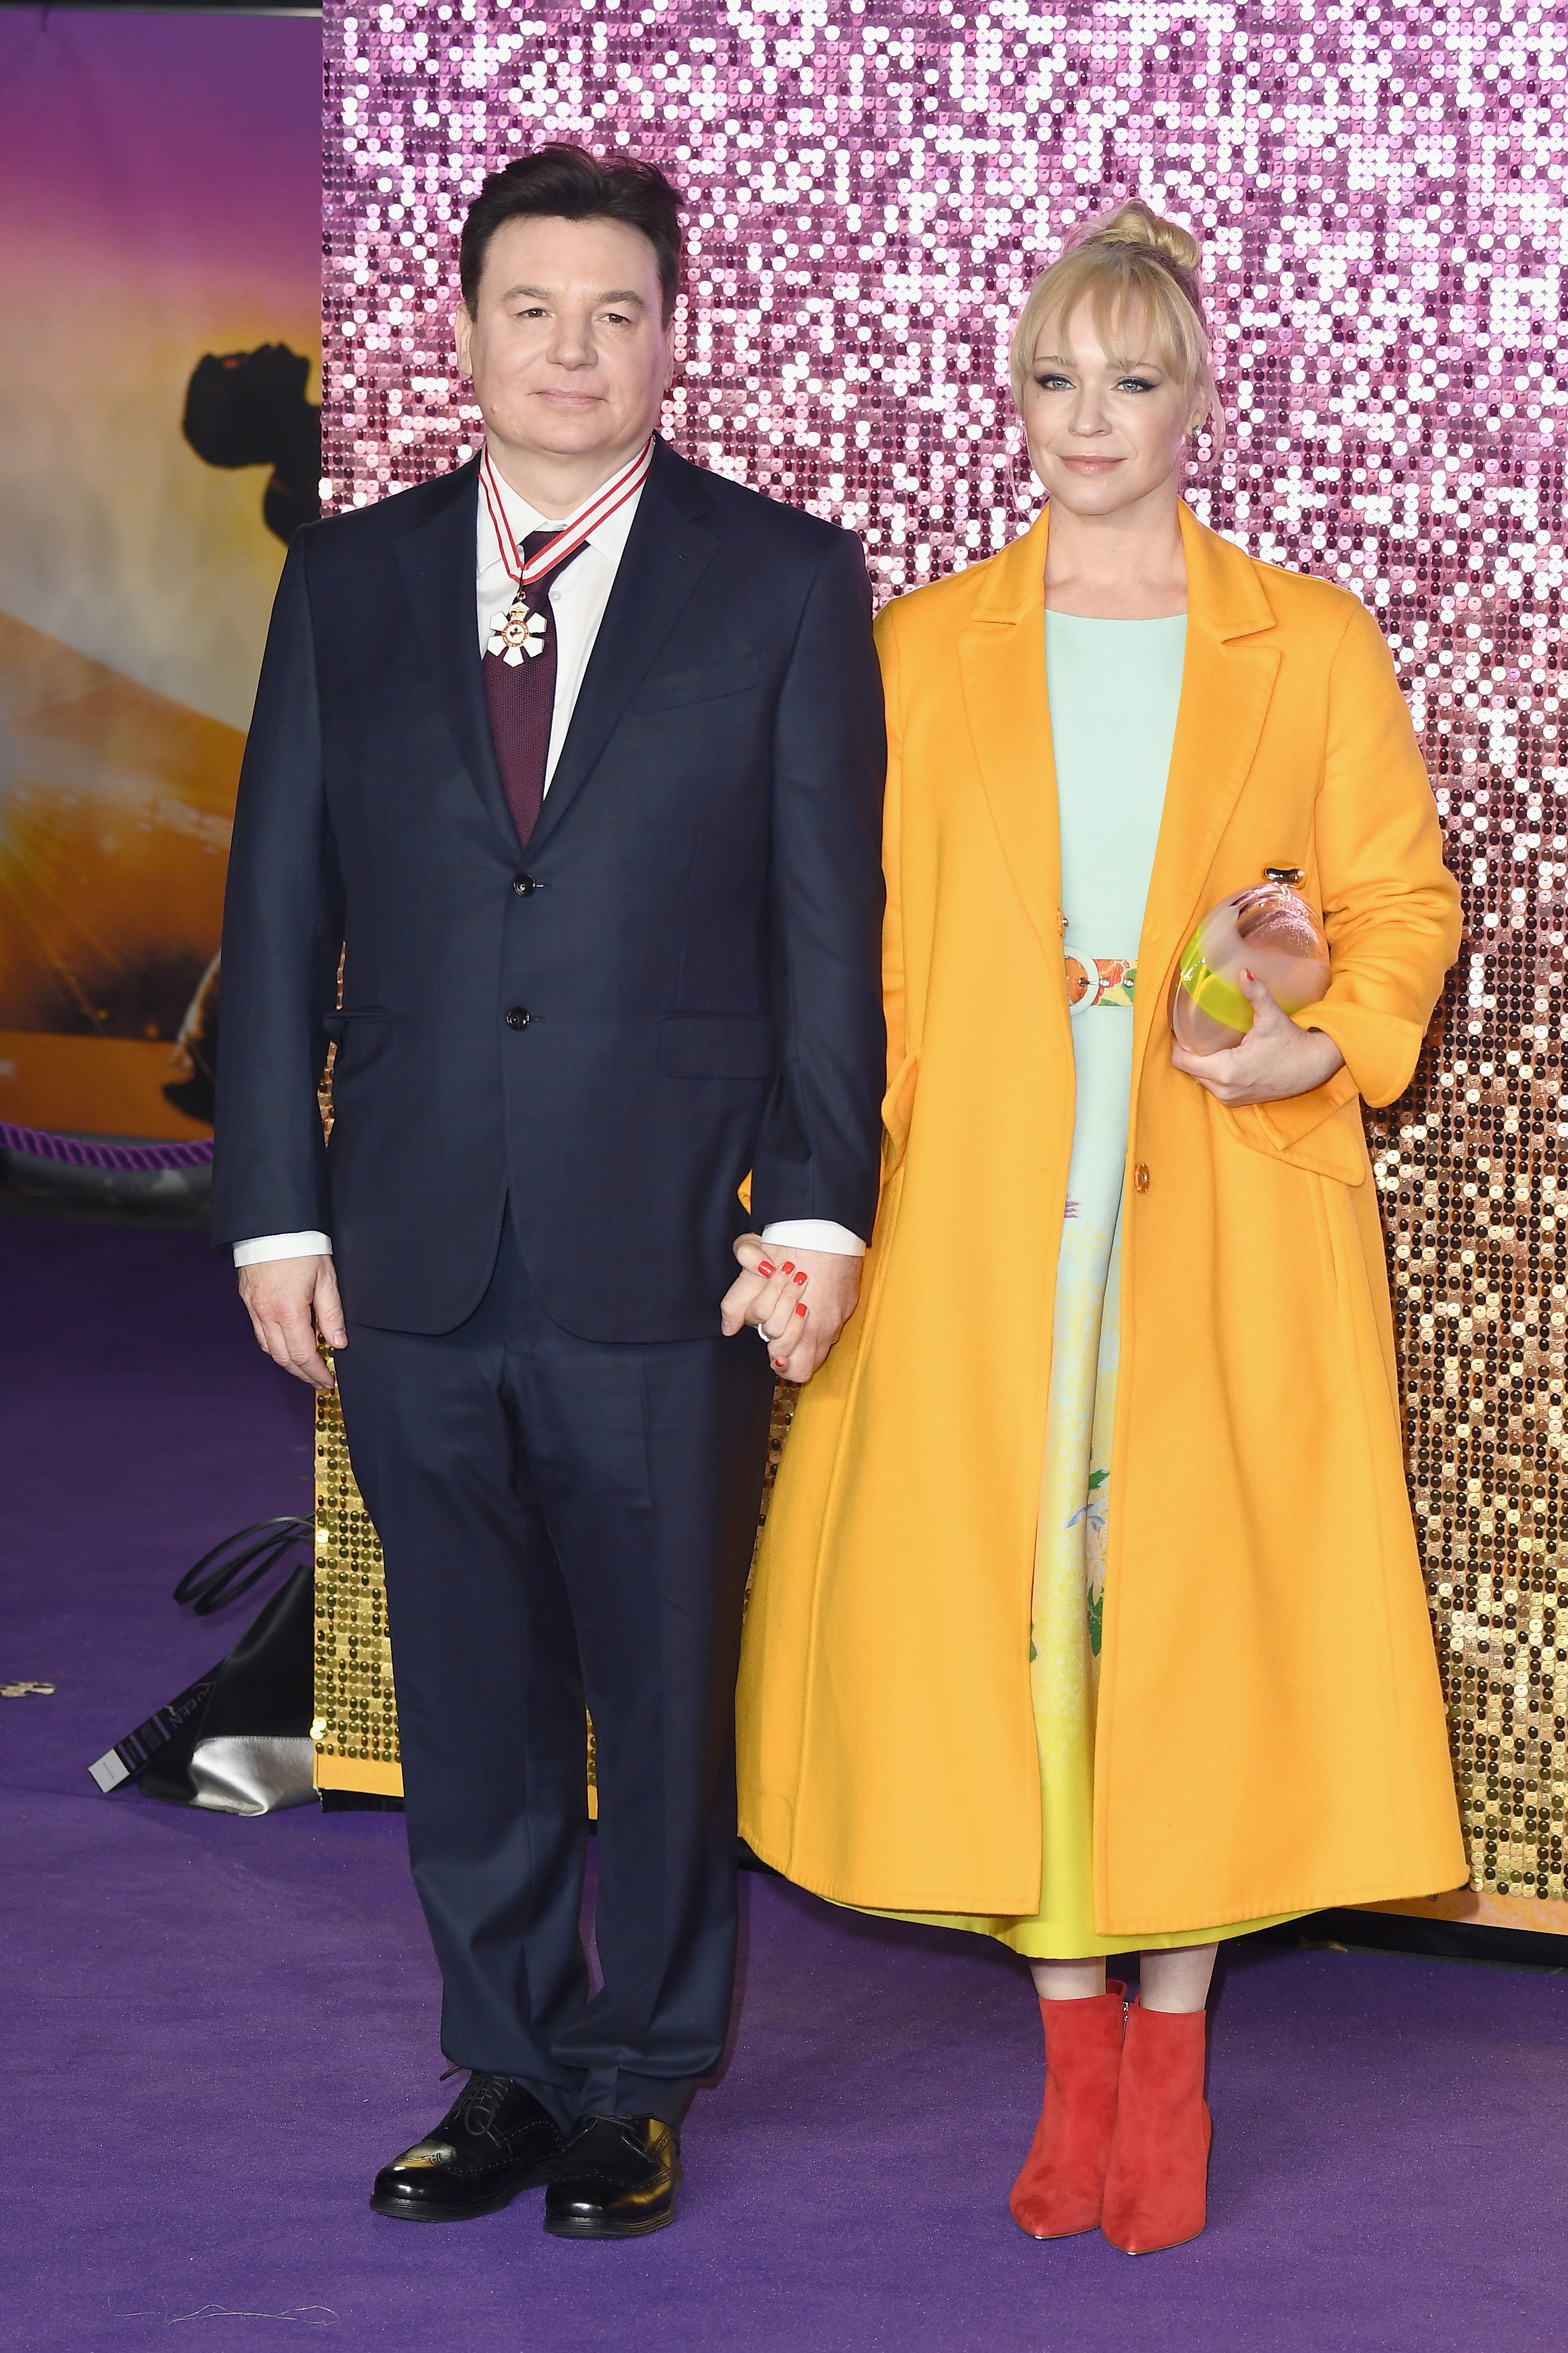 Mike Myers and Kelly Tisdale at the world premiere of "Bohemian Rhapsody" on October 23, 2018, in London | Source: Getty Images